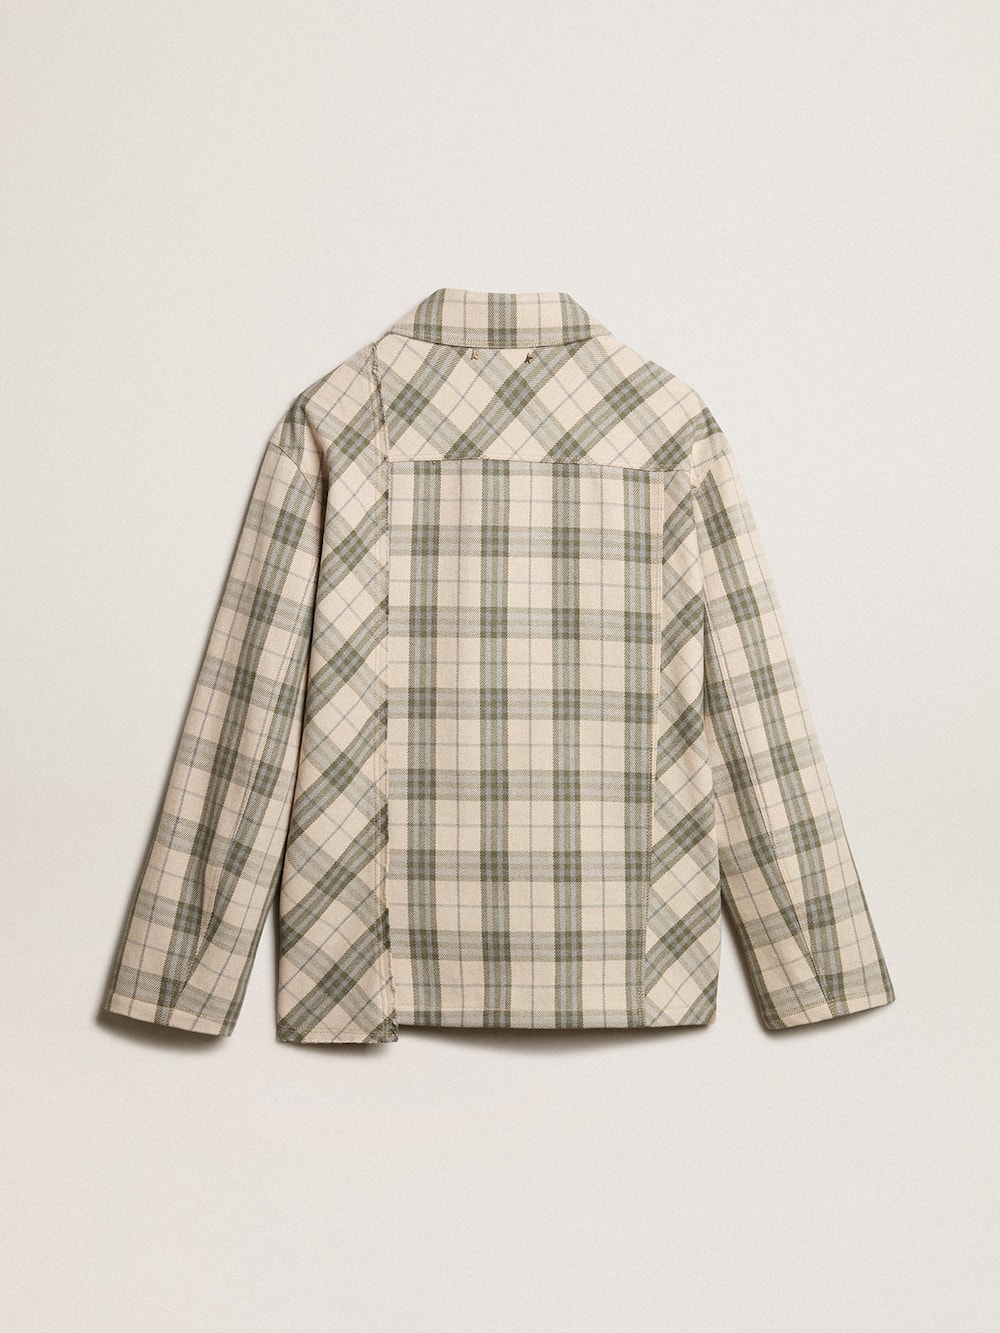 Golden Goose - Men's slim-fit shirt made of ecru and green cotton flannel in 